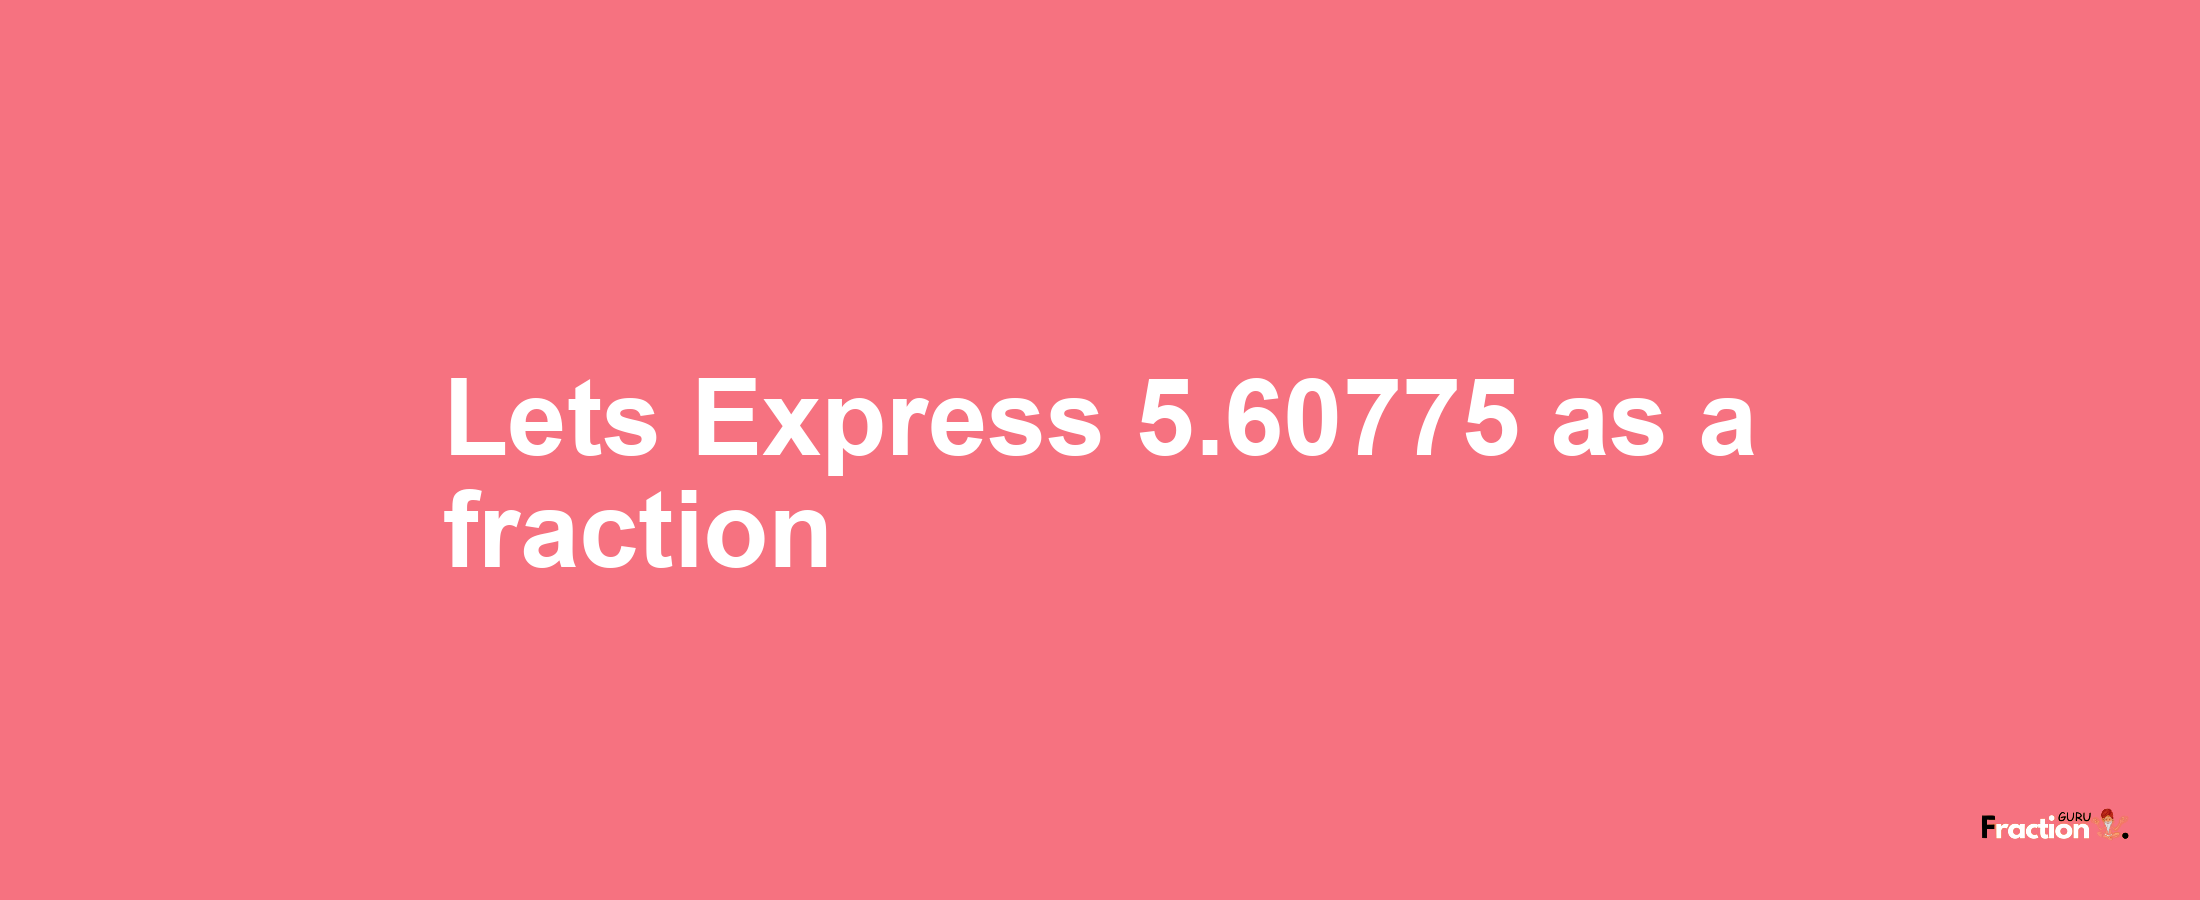 Lets Express 5.60775 as afraction